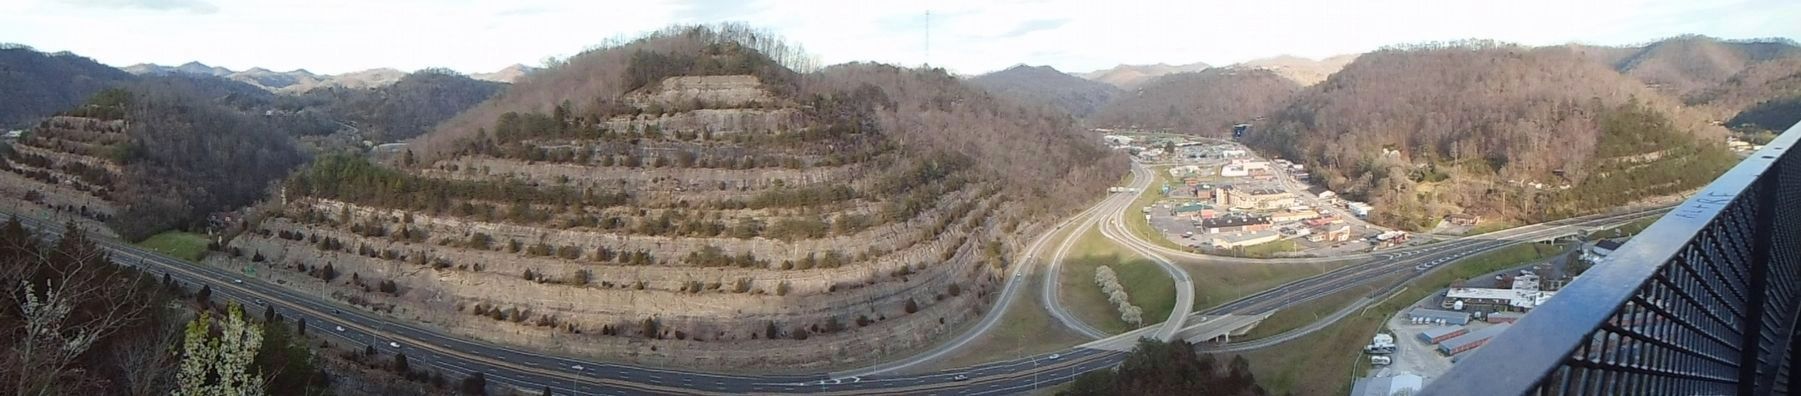 Pikeville Cut-Through Project View image. Click for full size.